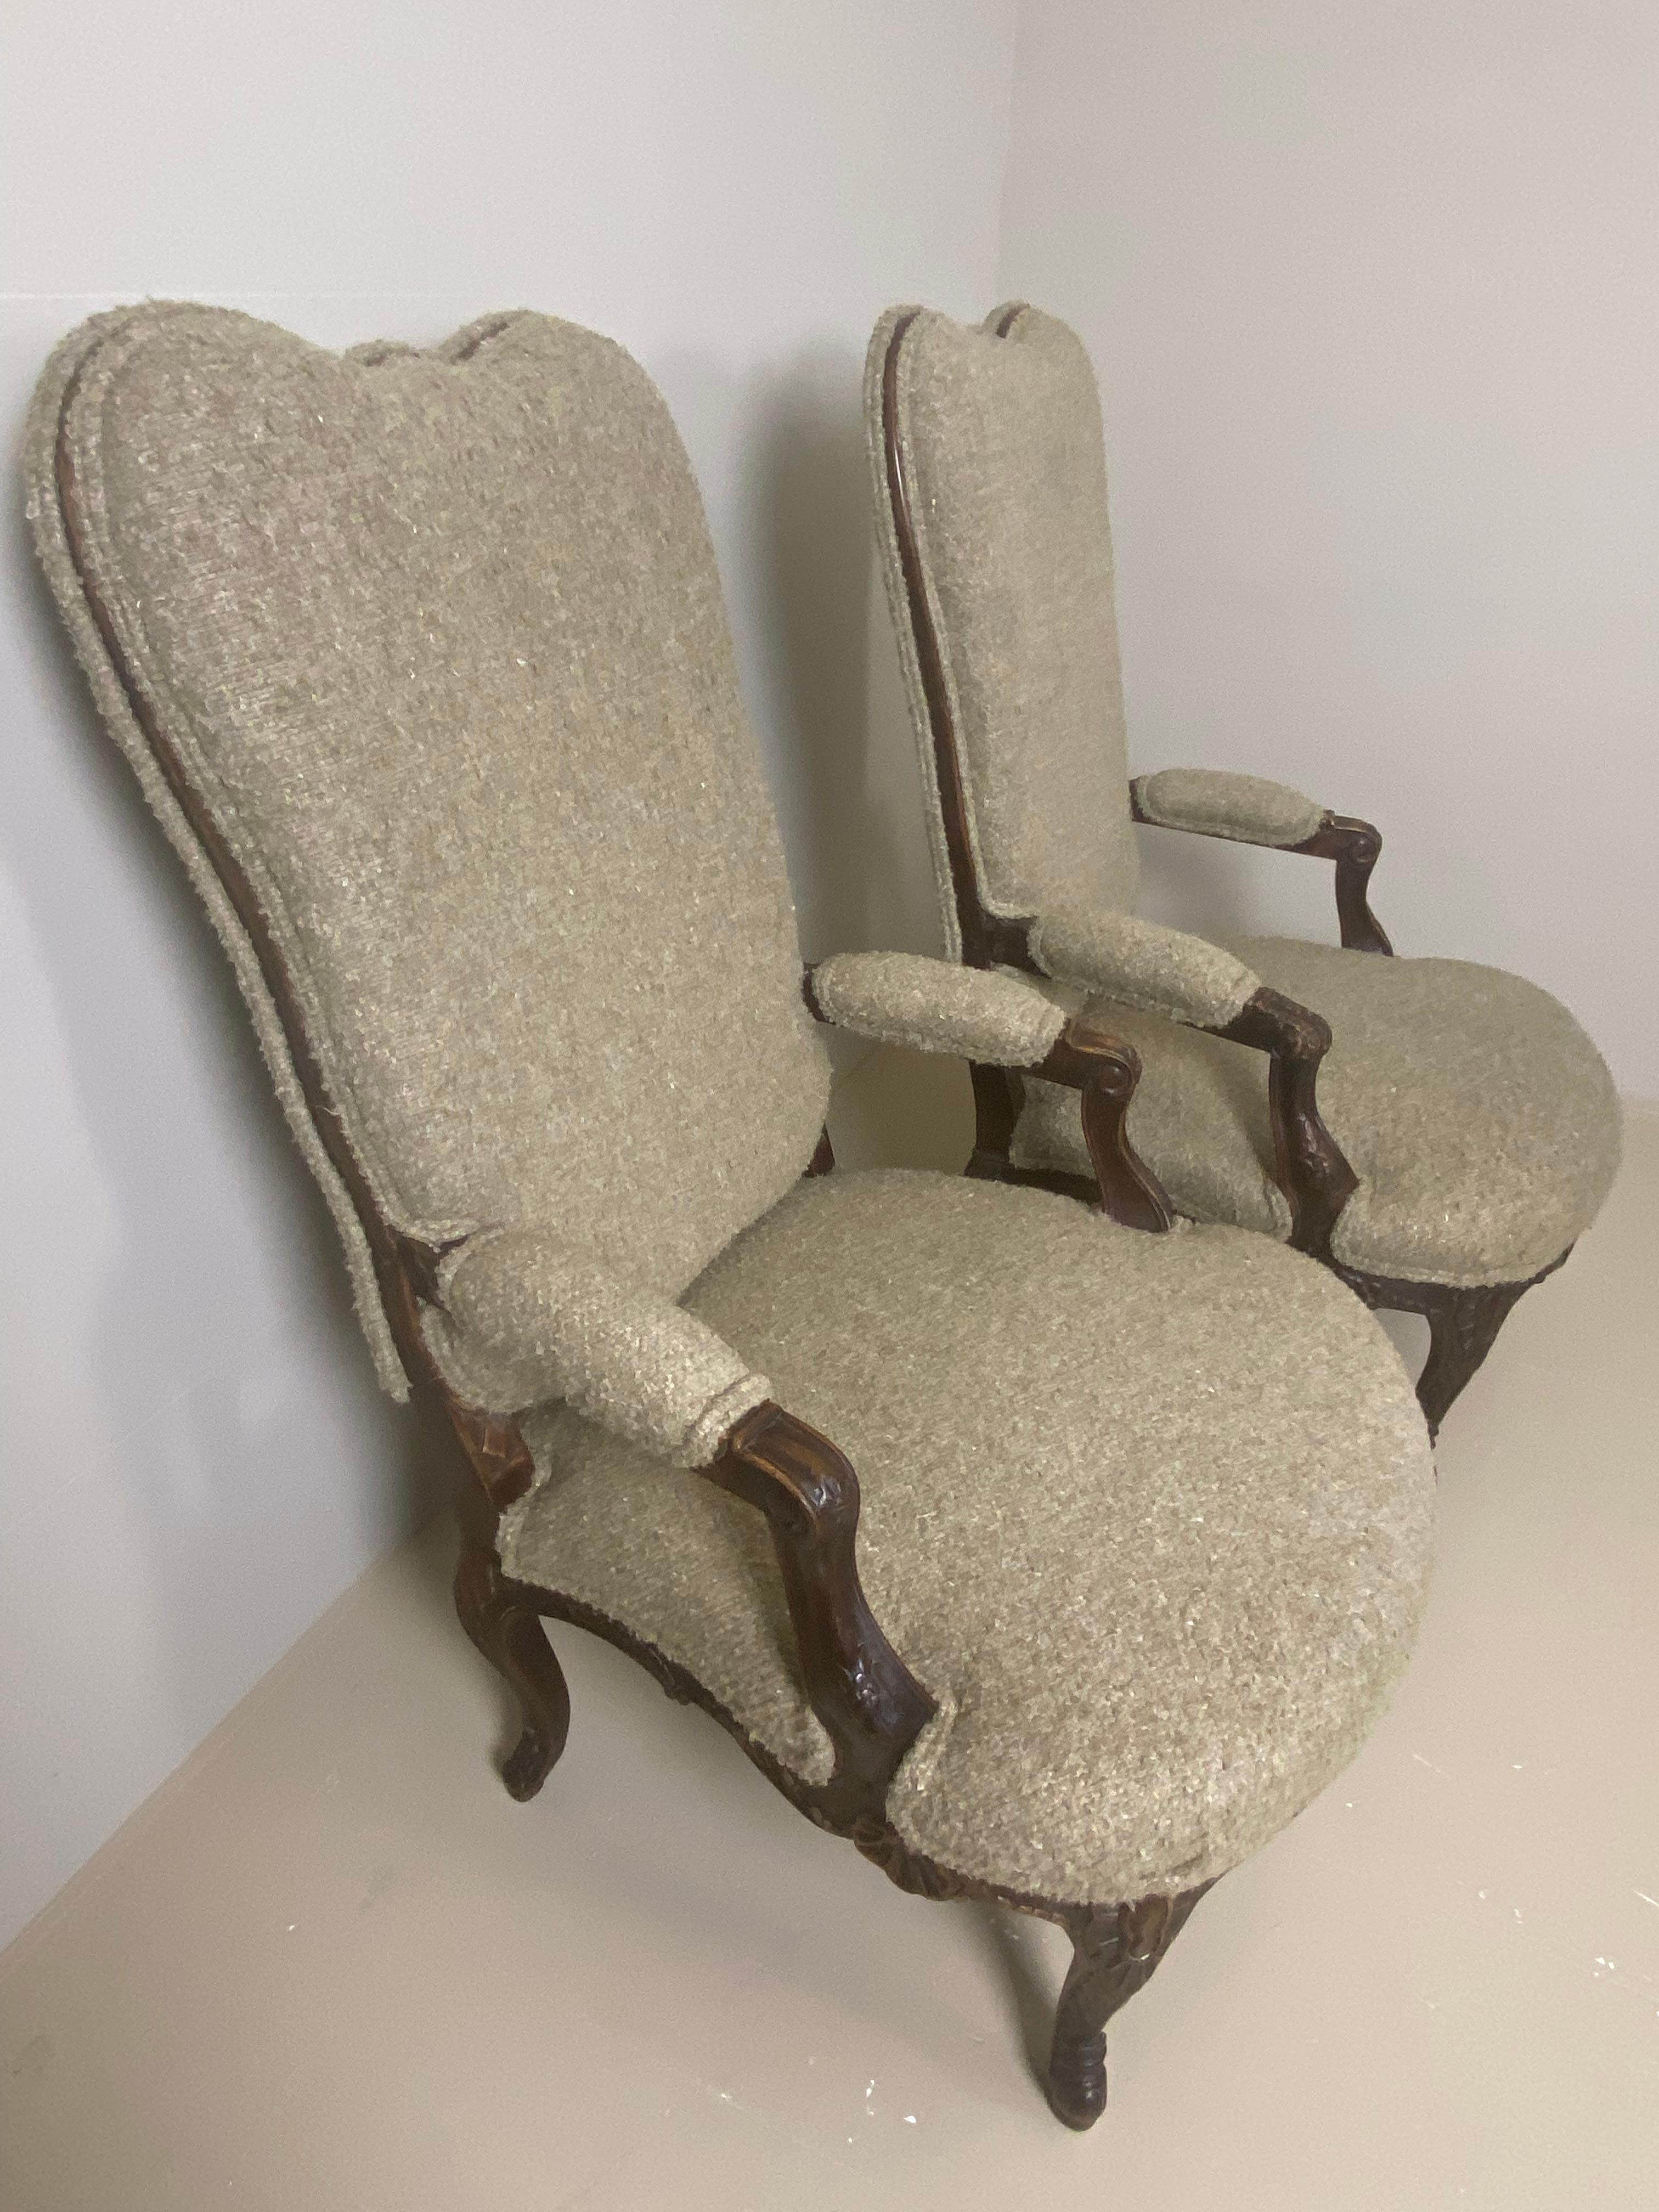 Pair of Antique, Rustic Dark Wooden Armchairs with New Upholstery In Excellent Condition For Sale In Schellebelle, BE